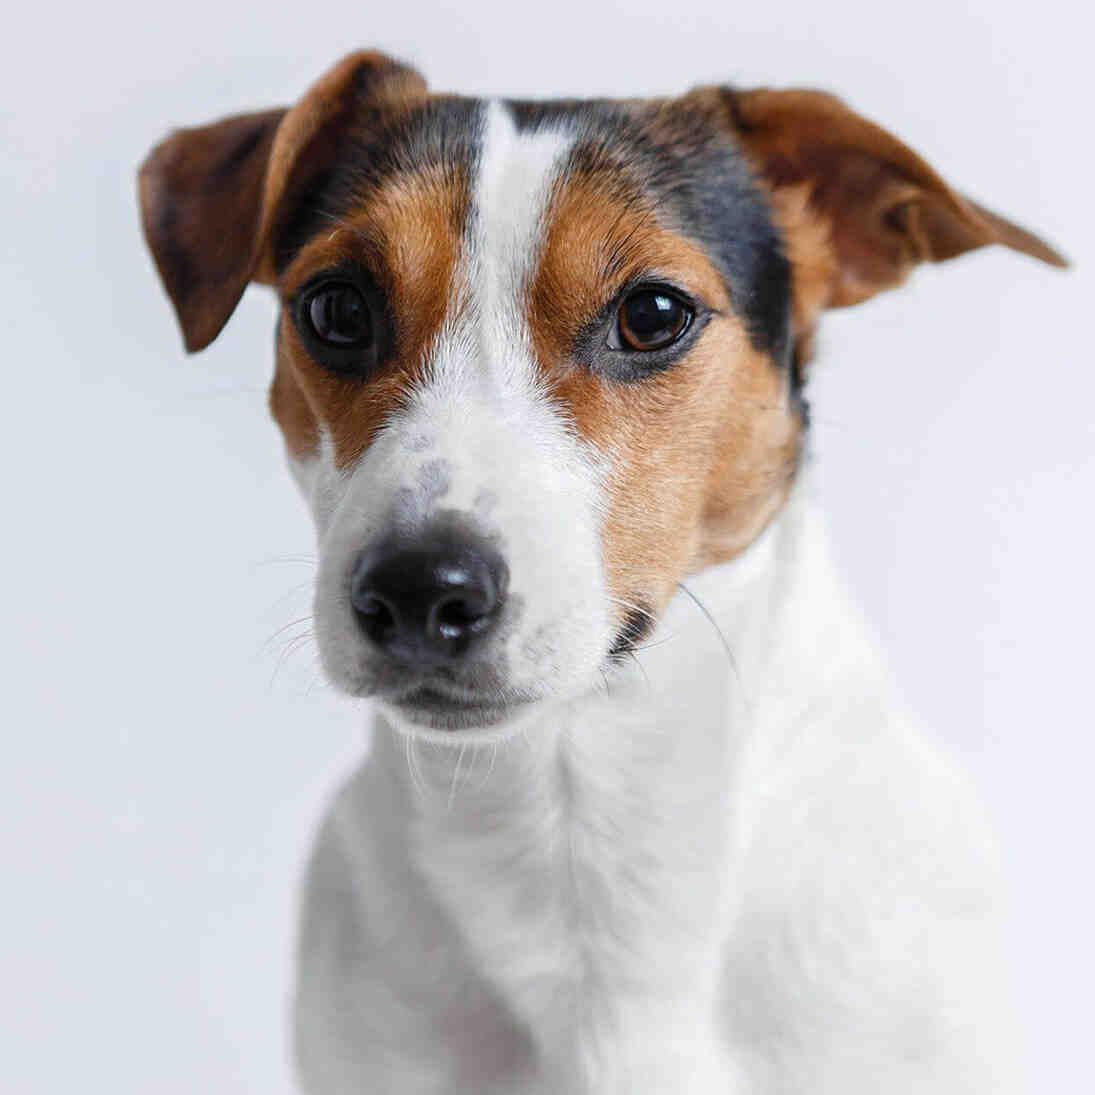 Why do Jack Russells limp?